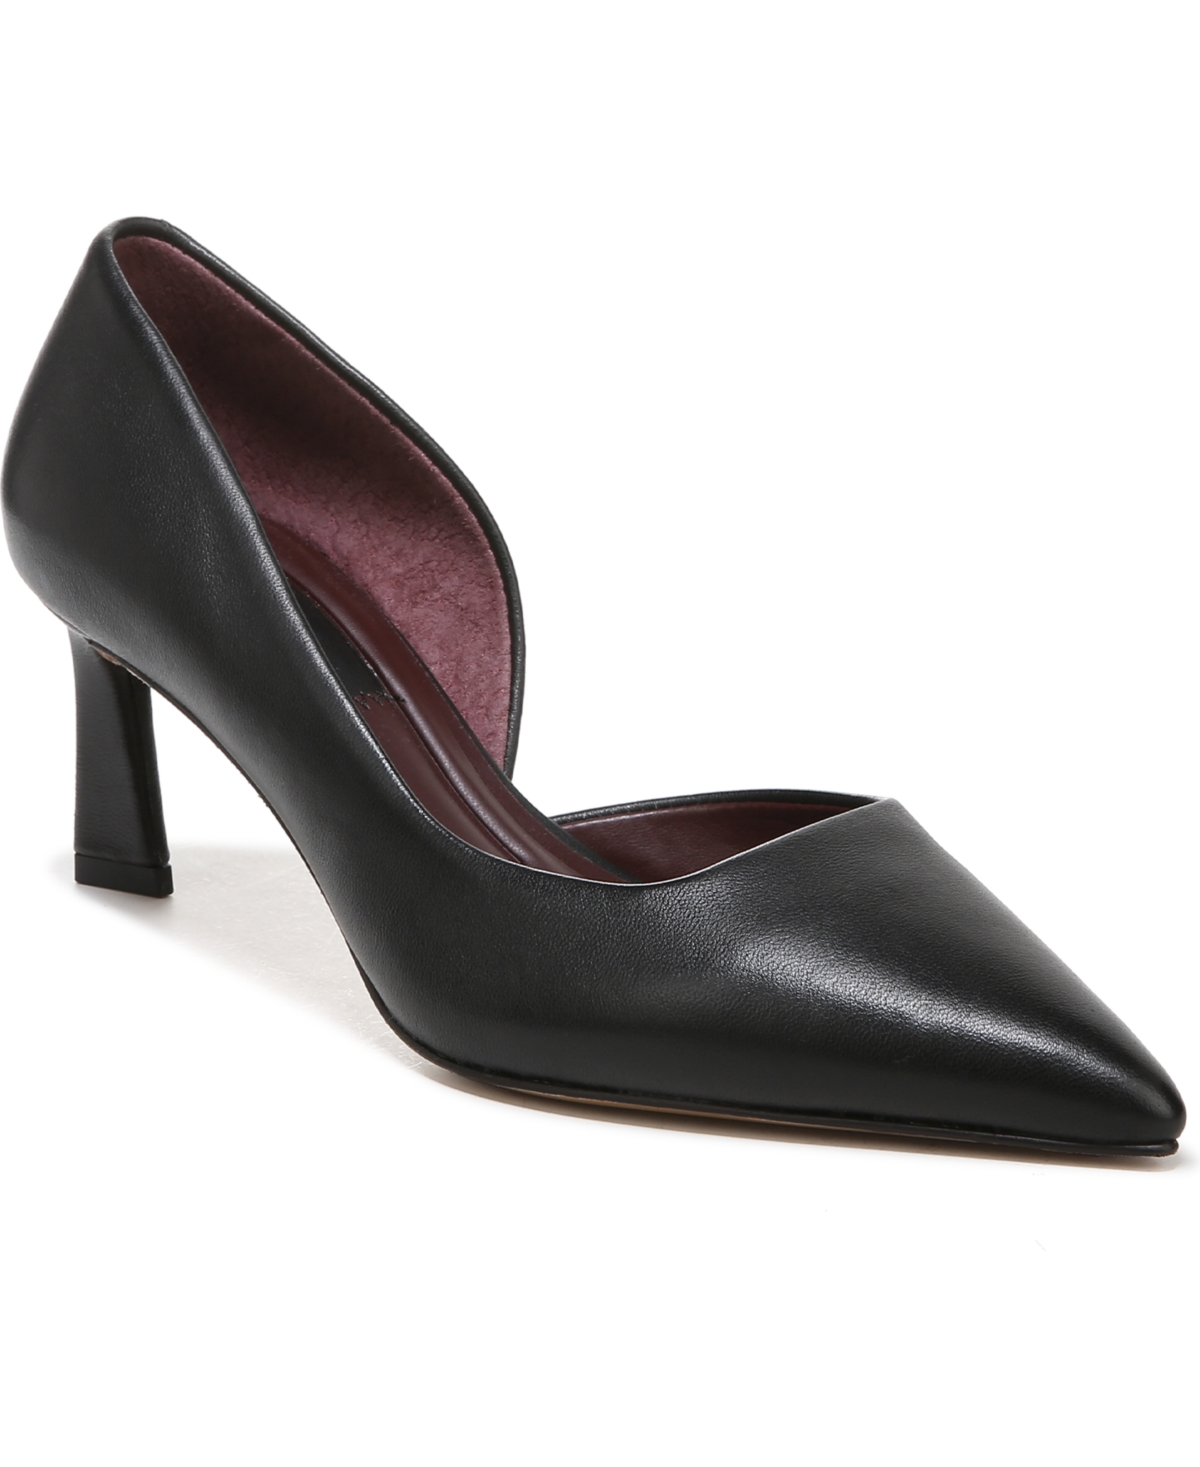 Tana Pointed Toe Pumps - Black Leather